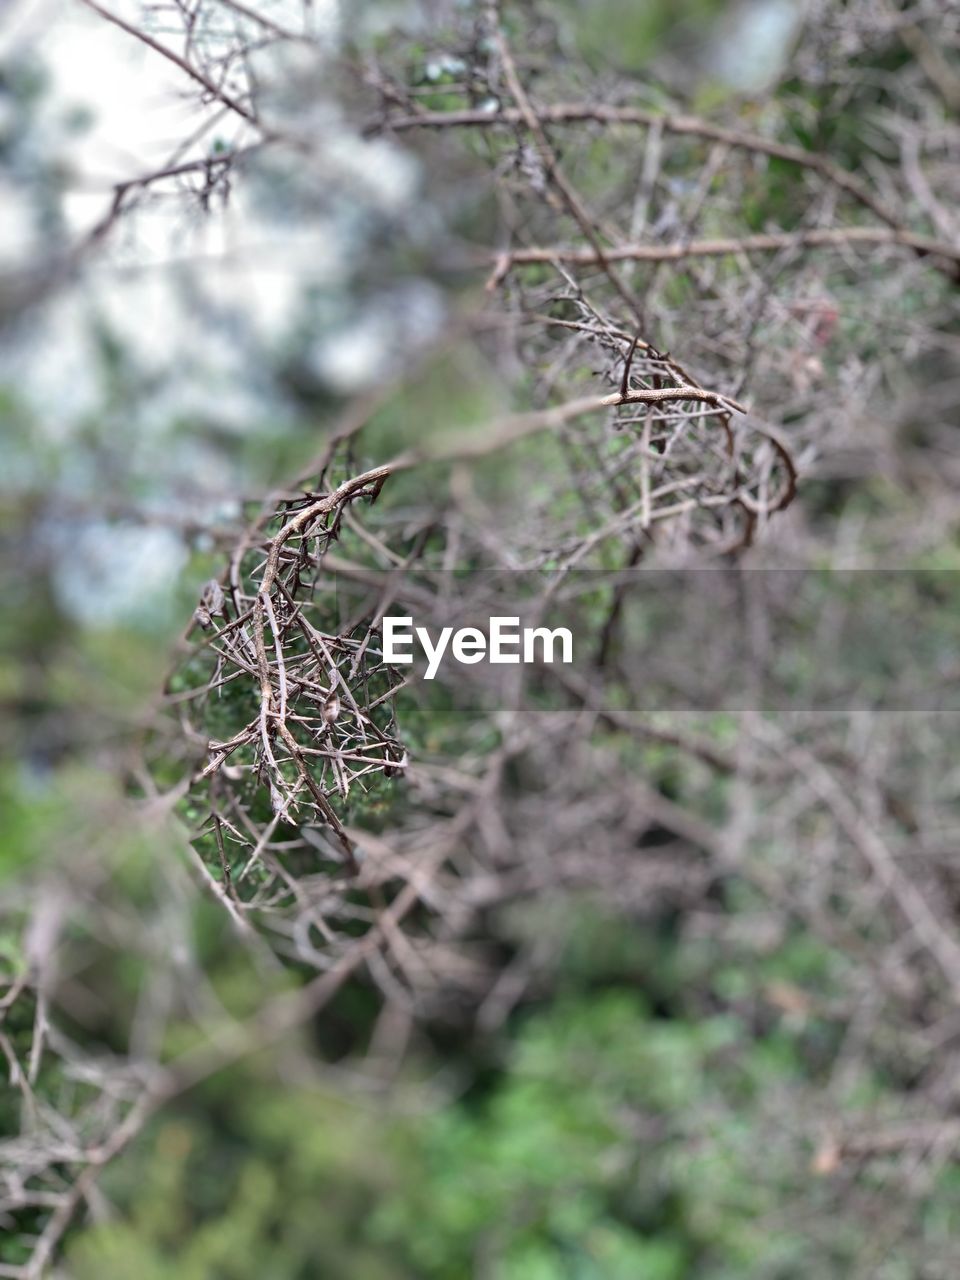 CLOSE-UP OF DEAD PLANT ON BRANCH